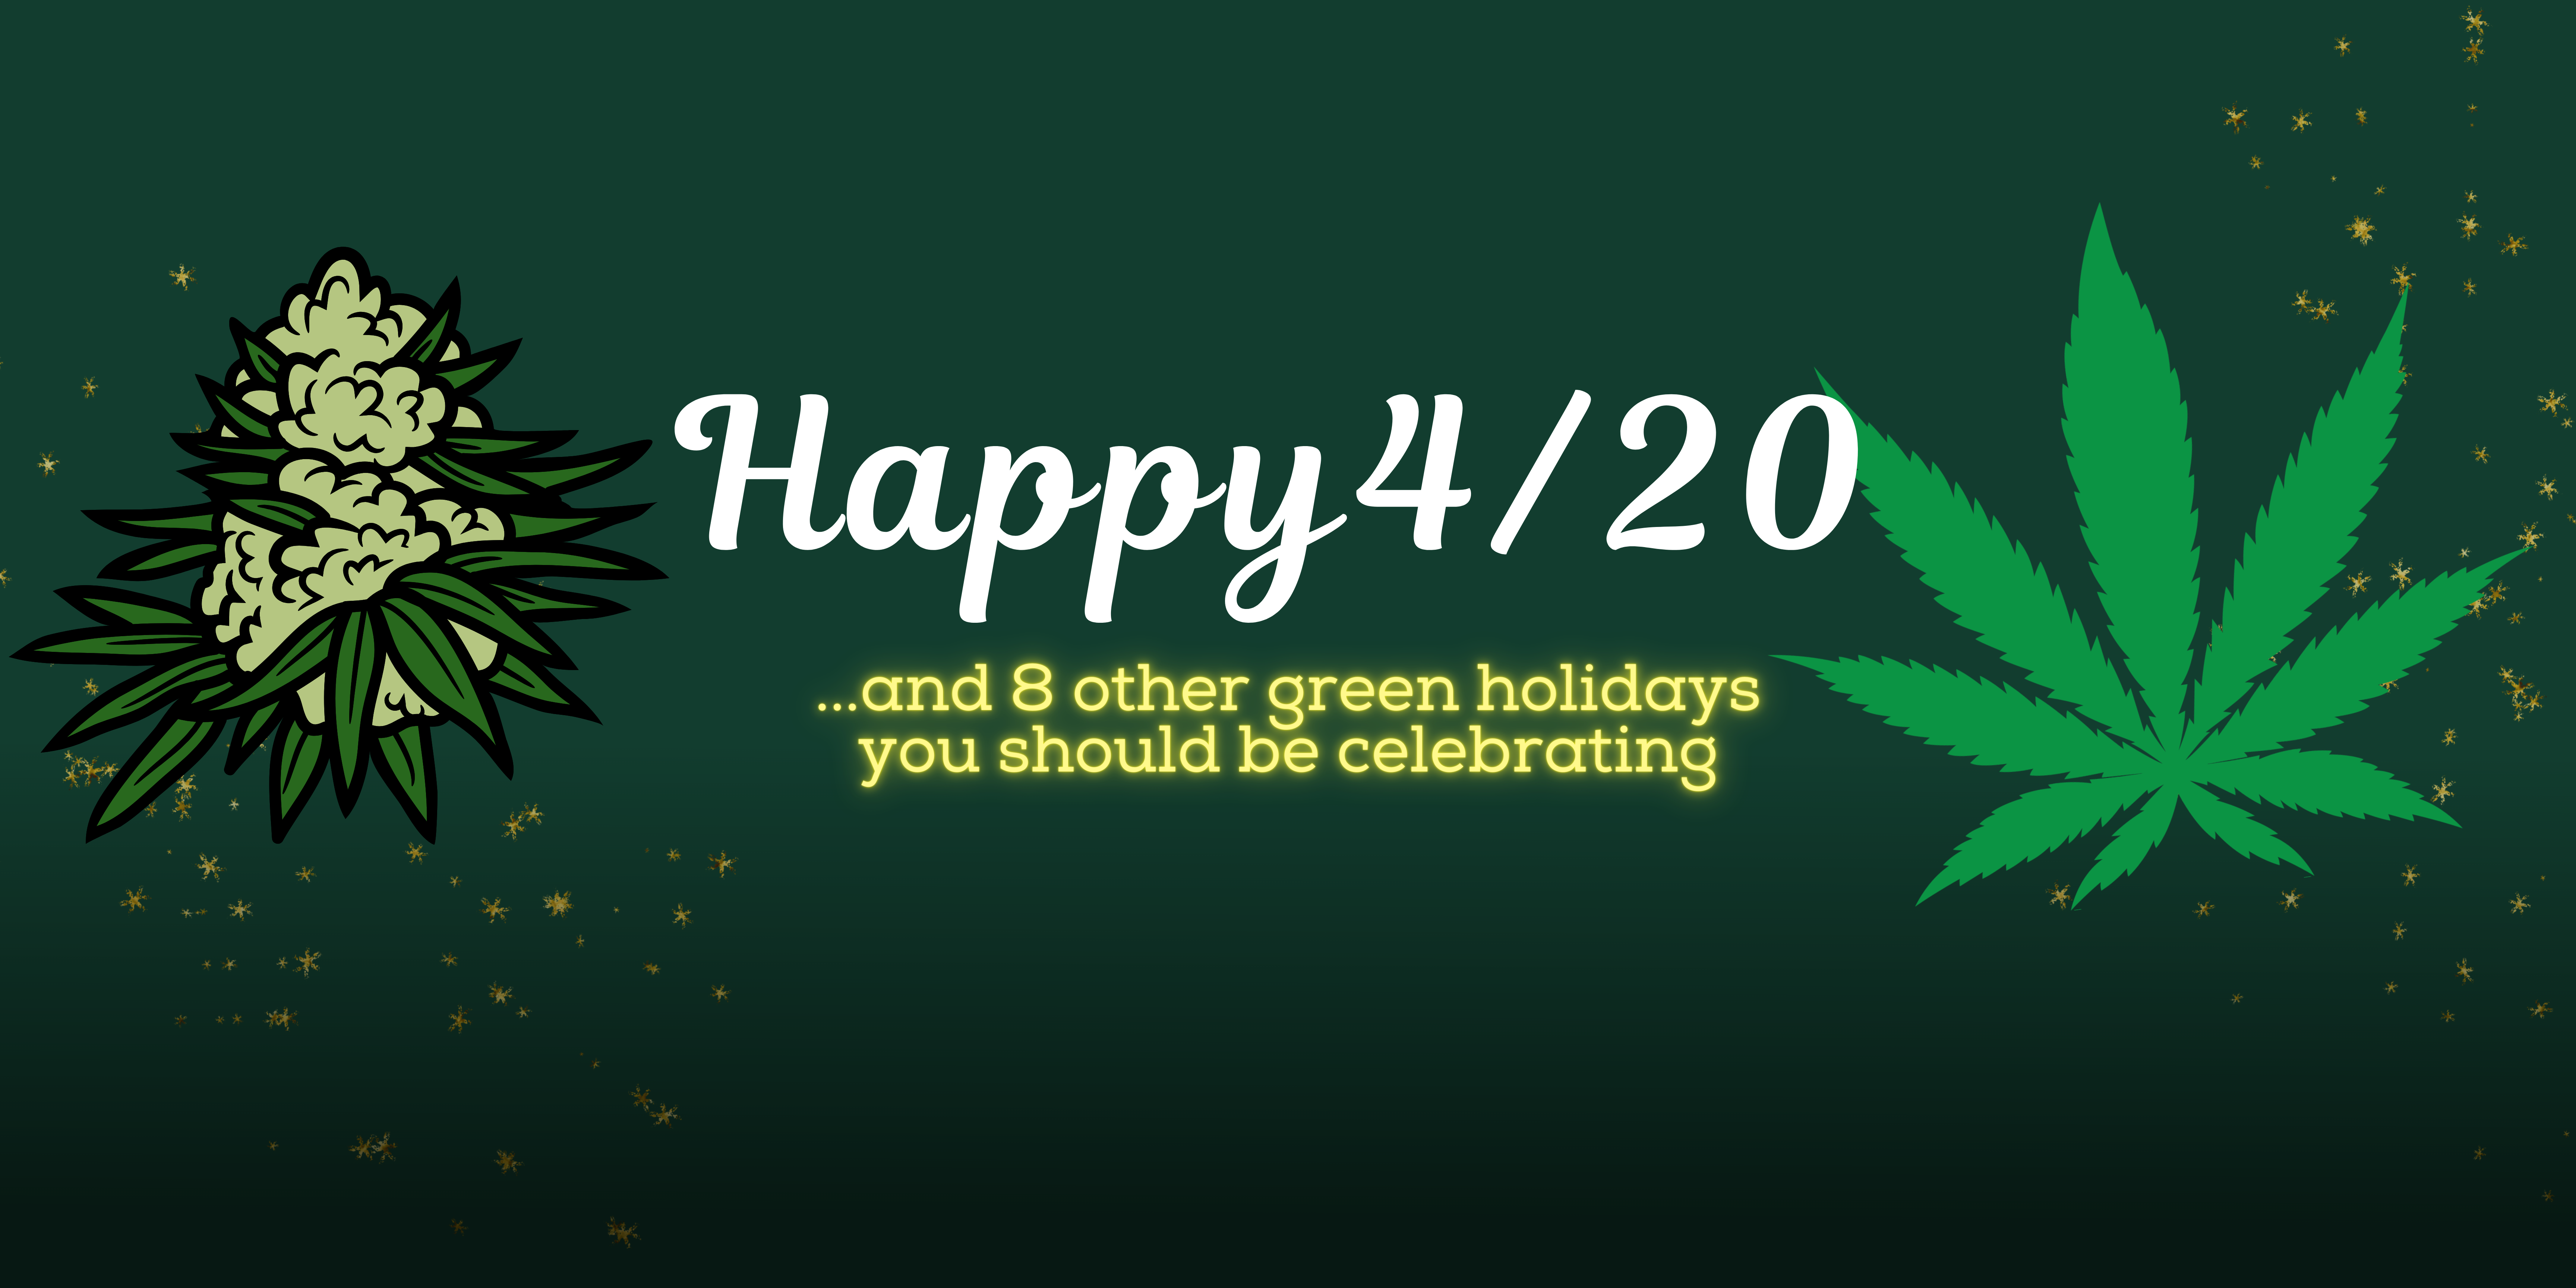 Happy 420 card from Budmaster